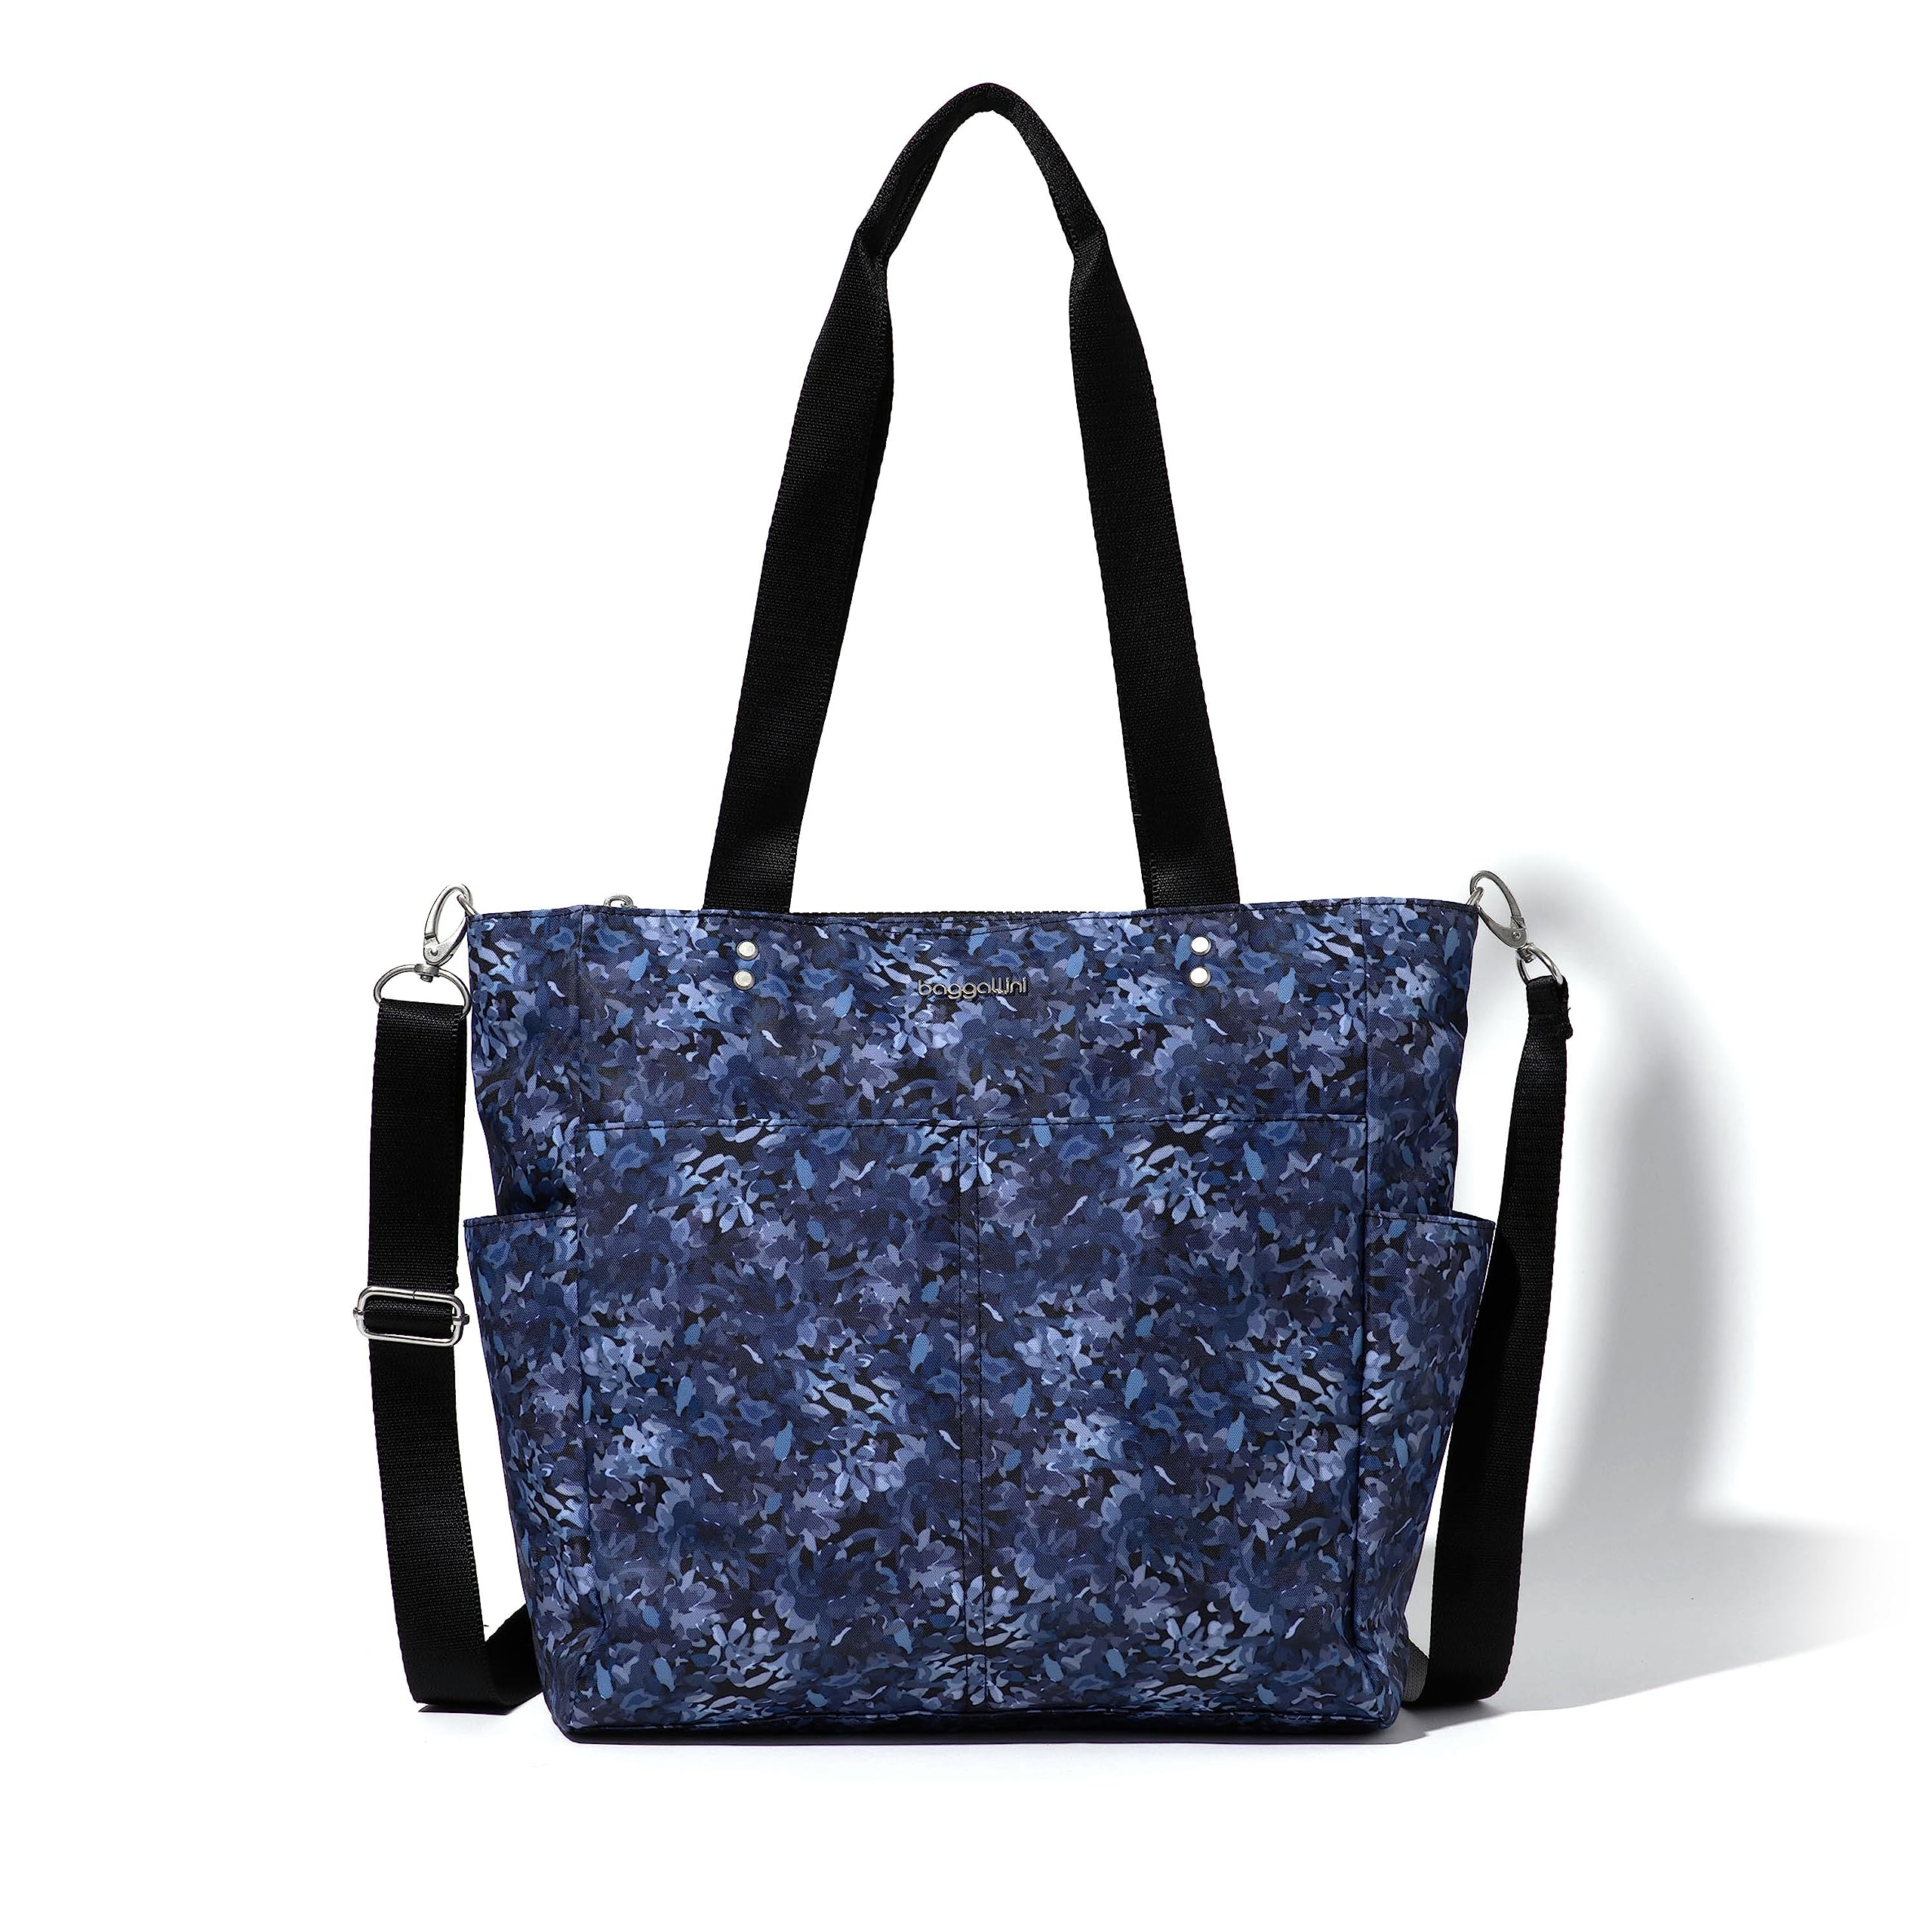 Baggallini Carryall Daily Tote